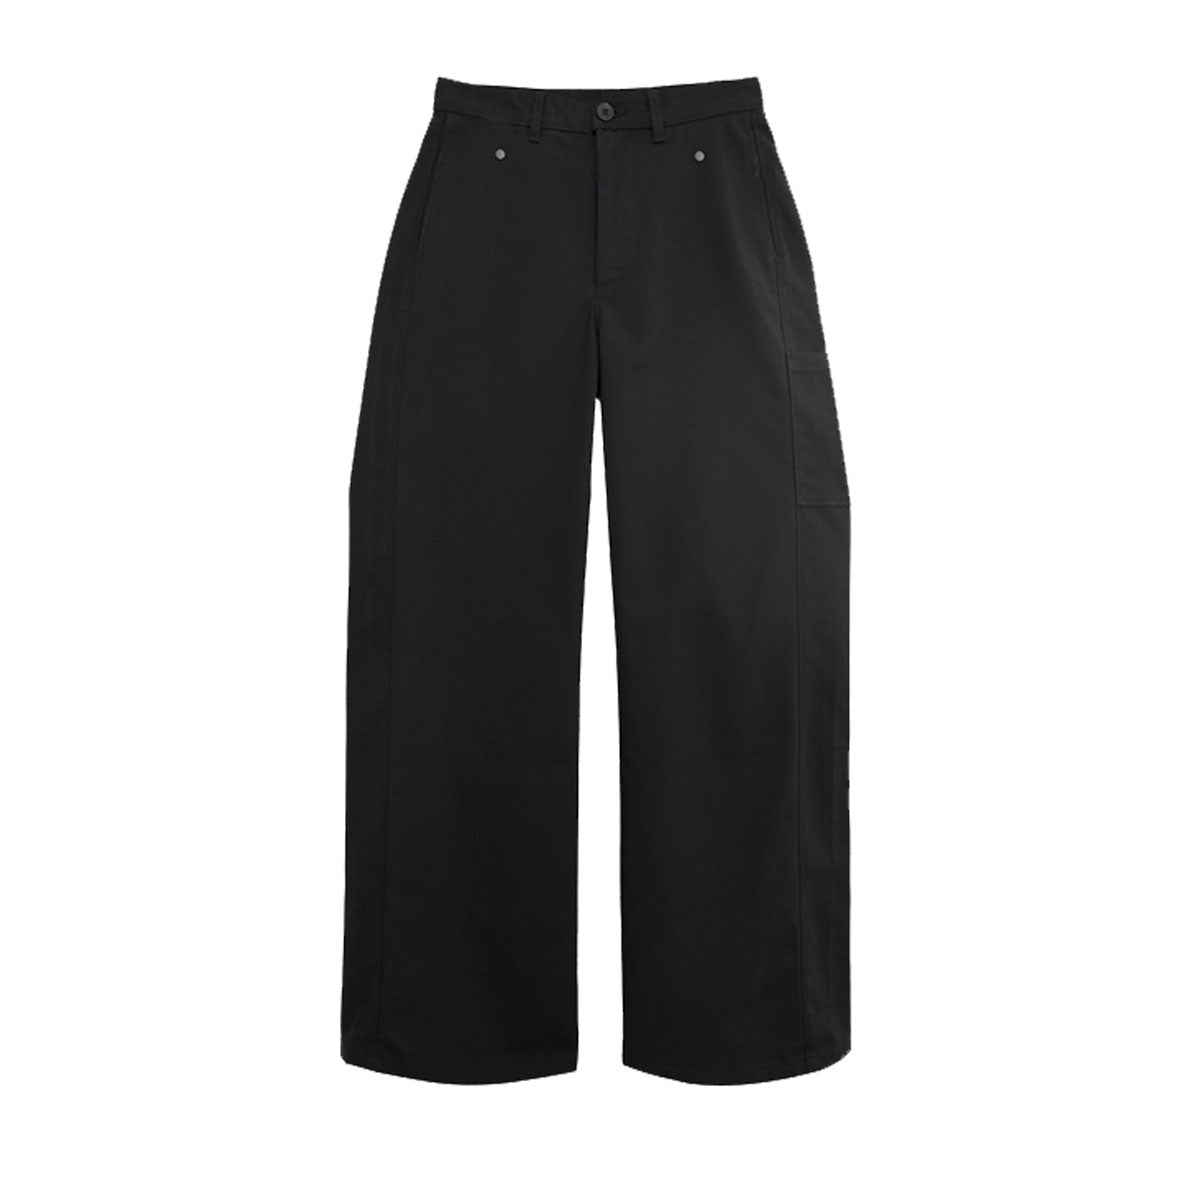 VUJADE - DOMA HYBRID UTILITY TROUSERS(エプロン付きベーシックトラウザー)